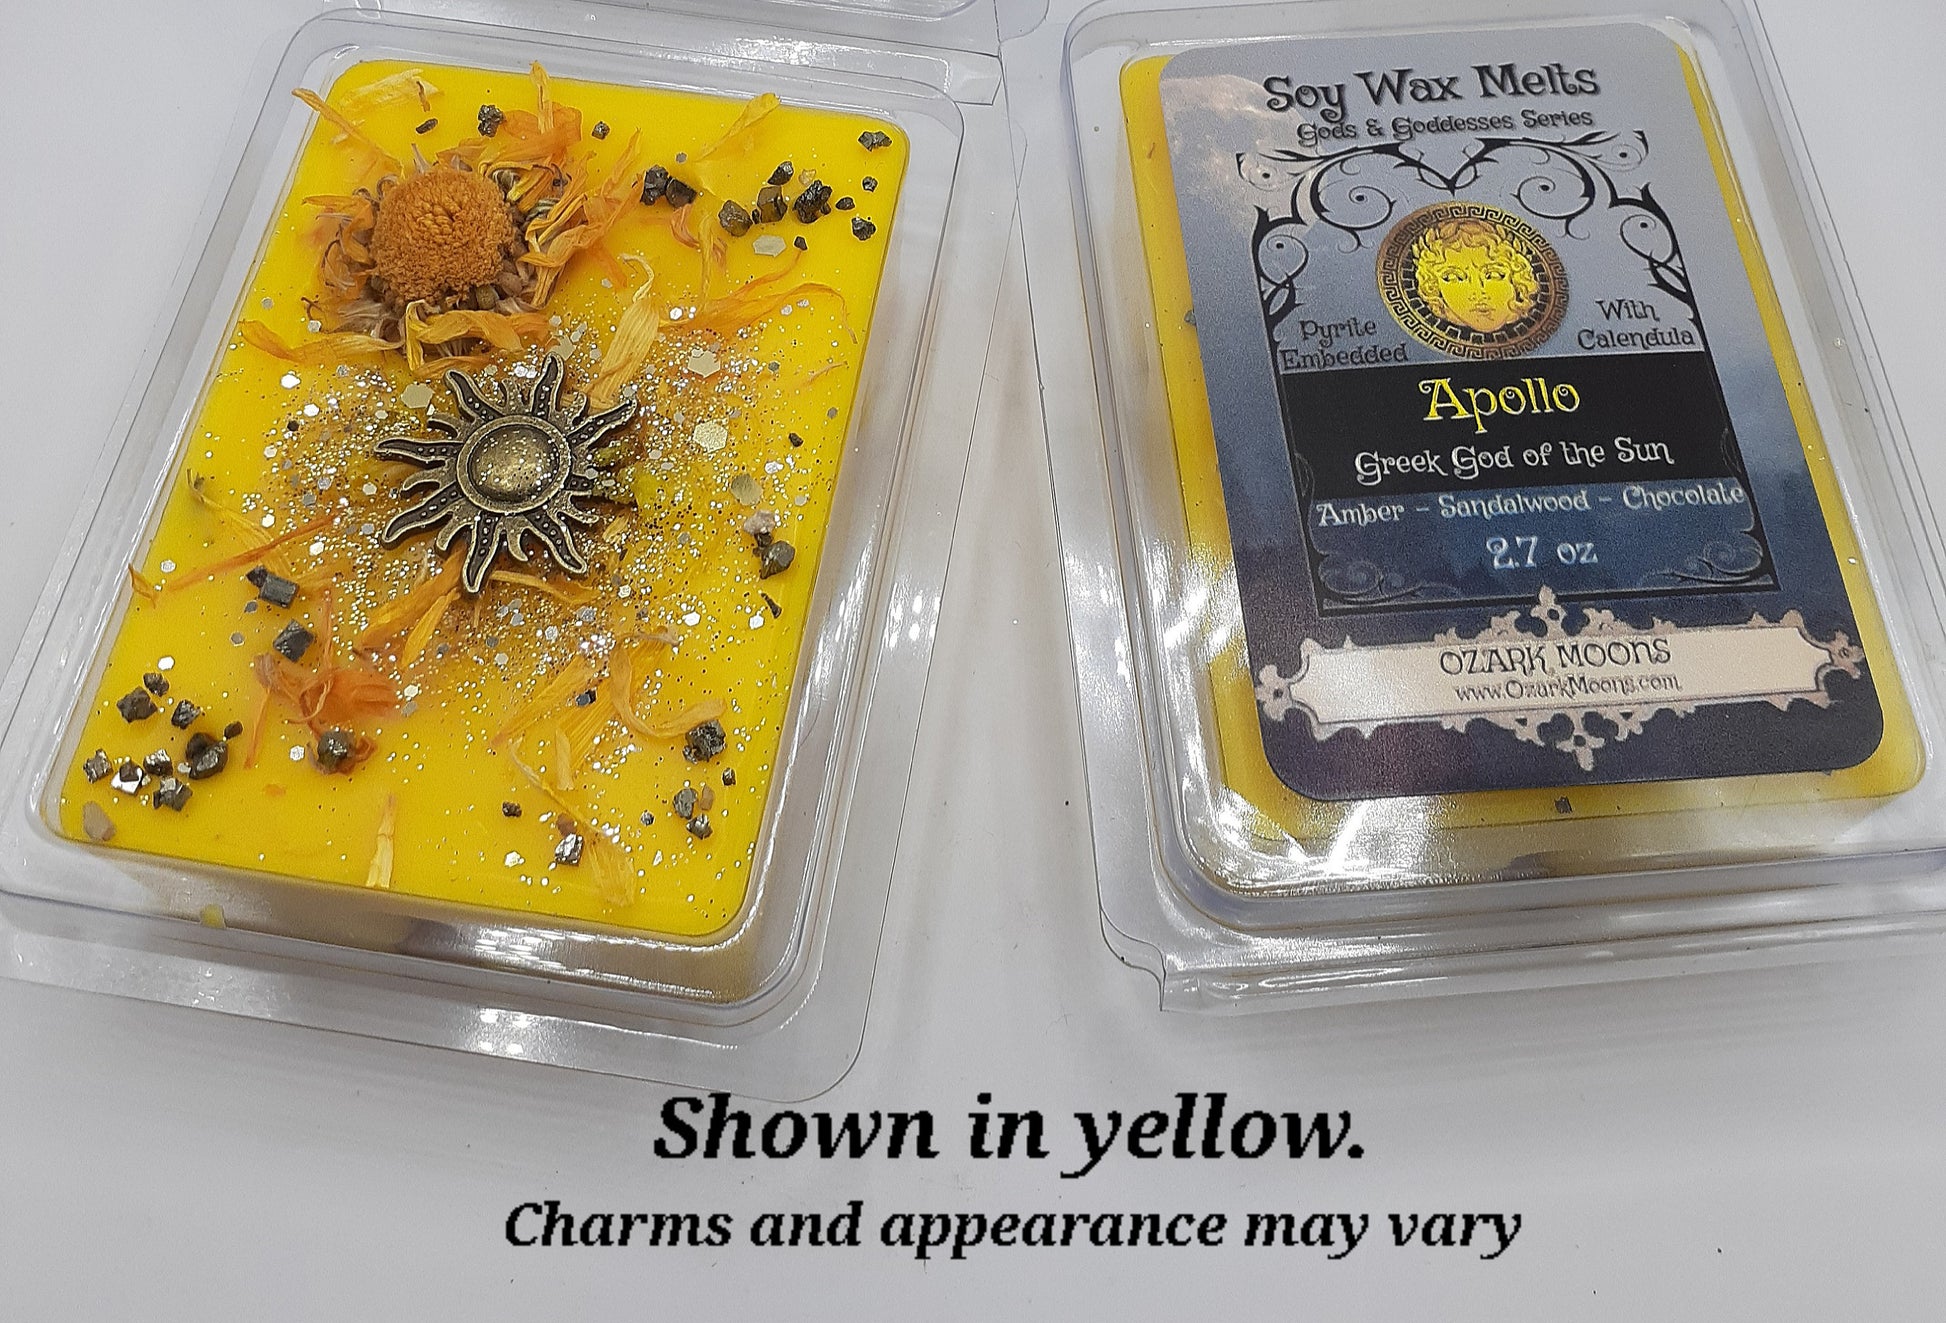 APOLLO Greek God of the Sun Candles or Wax Melts with Pyrite Crystals and Calendula Flowers Tarts Highly Scented - Pagan Wiccan Wicca